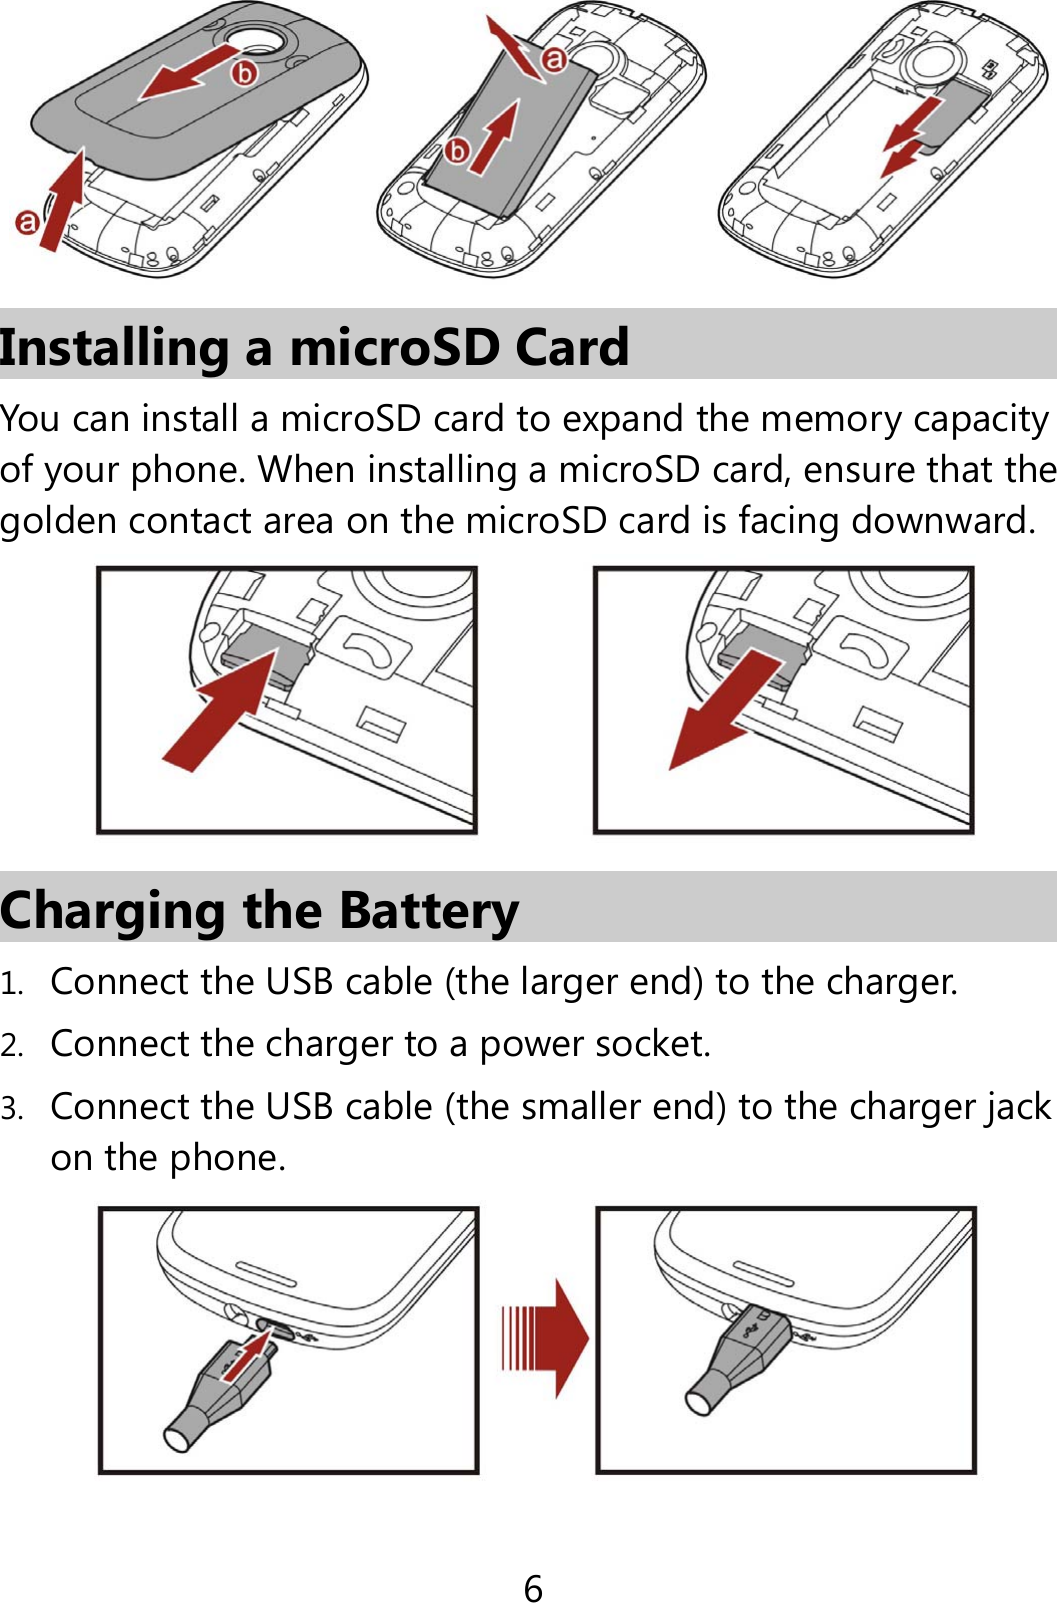 6  Installing a microSD Card You can install a microSD card to expand the memory capacity of your phone. When installing a microSD card, ensure that the golden contact area on the microSD card is facing downward.    Charging the Battery 1. Connect the USB cable (the larger end) to the charger.   2. Connect the charger to a power socket. 3. Connect the USB cable (the smaller end) to the charger jack on the phone.    